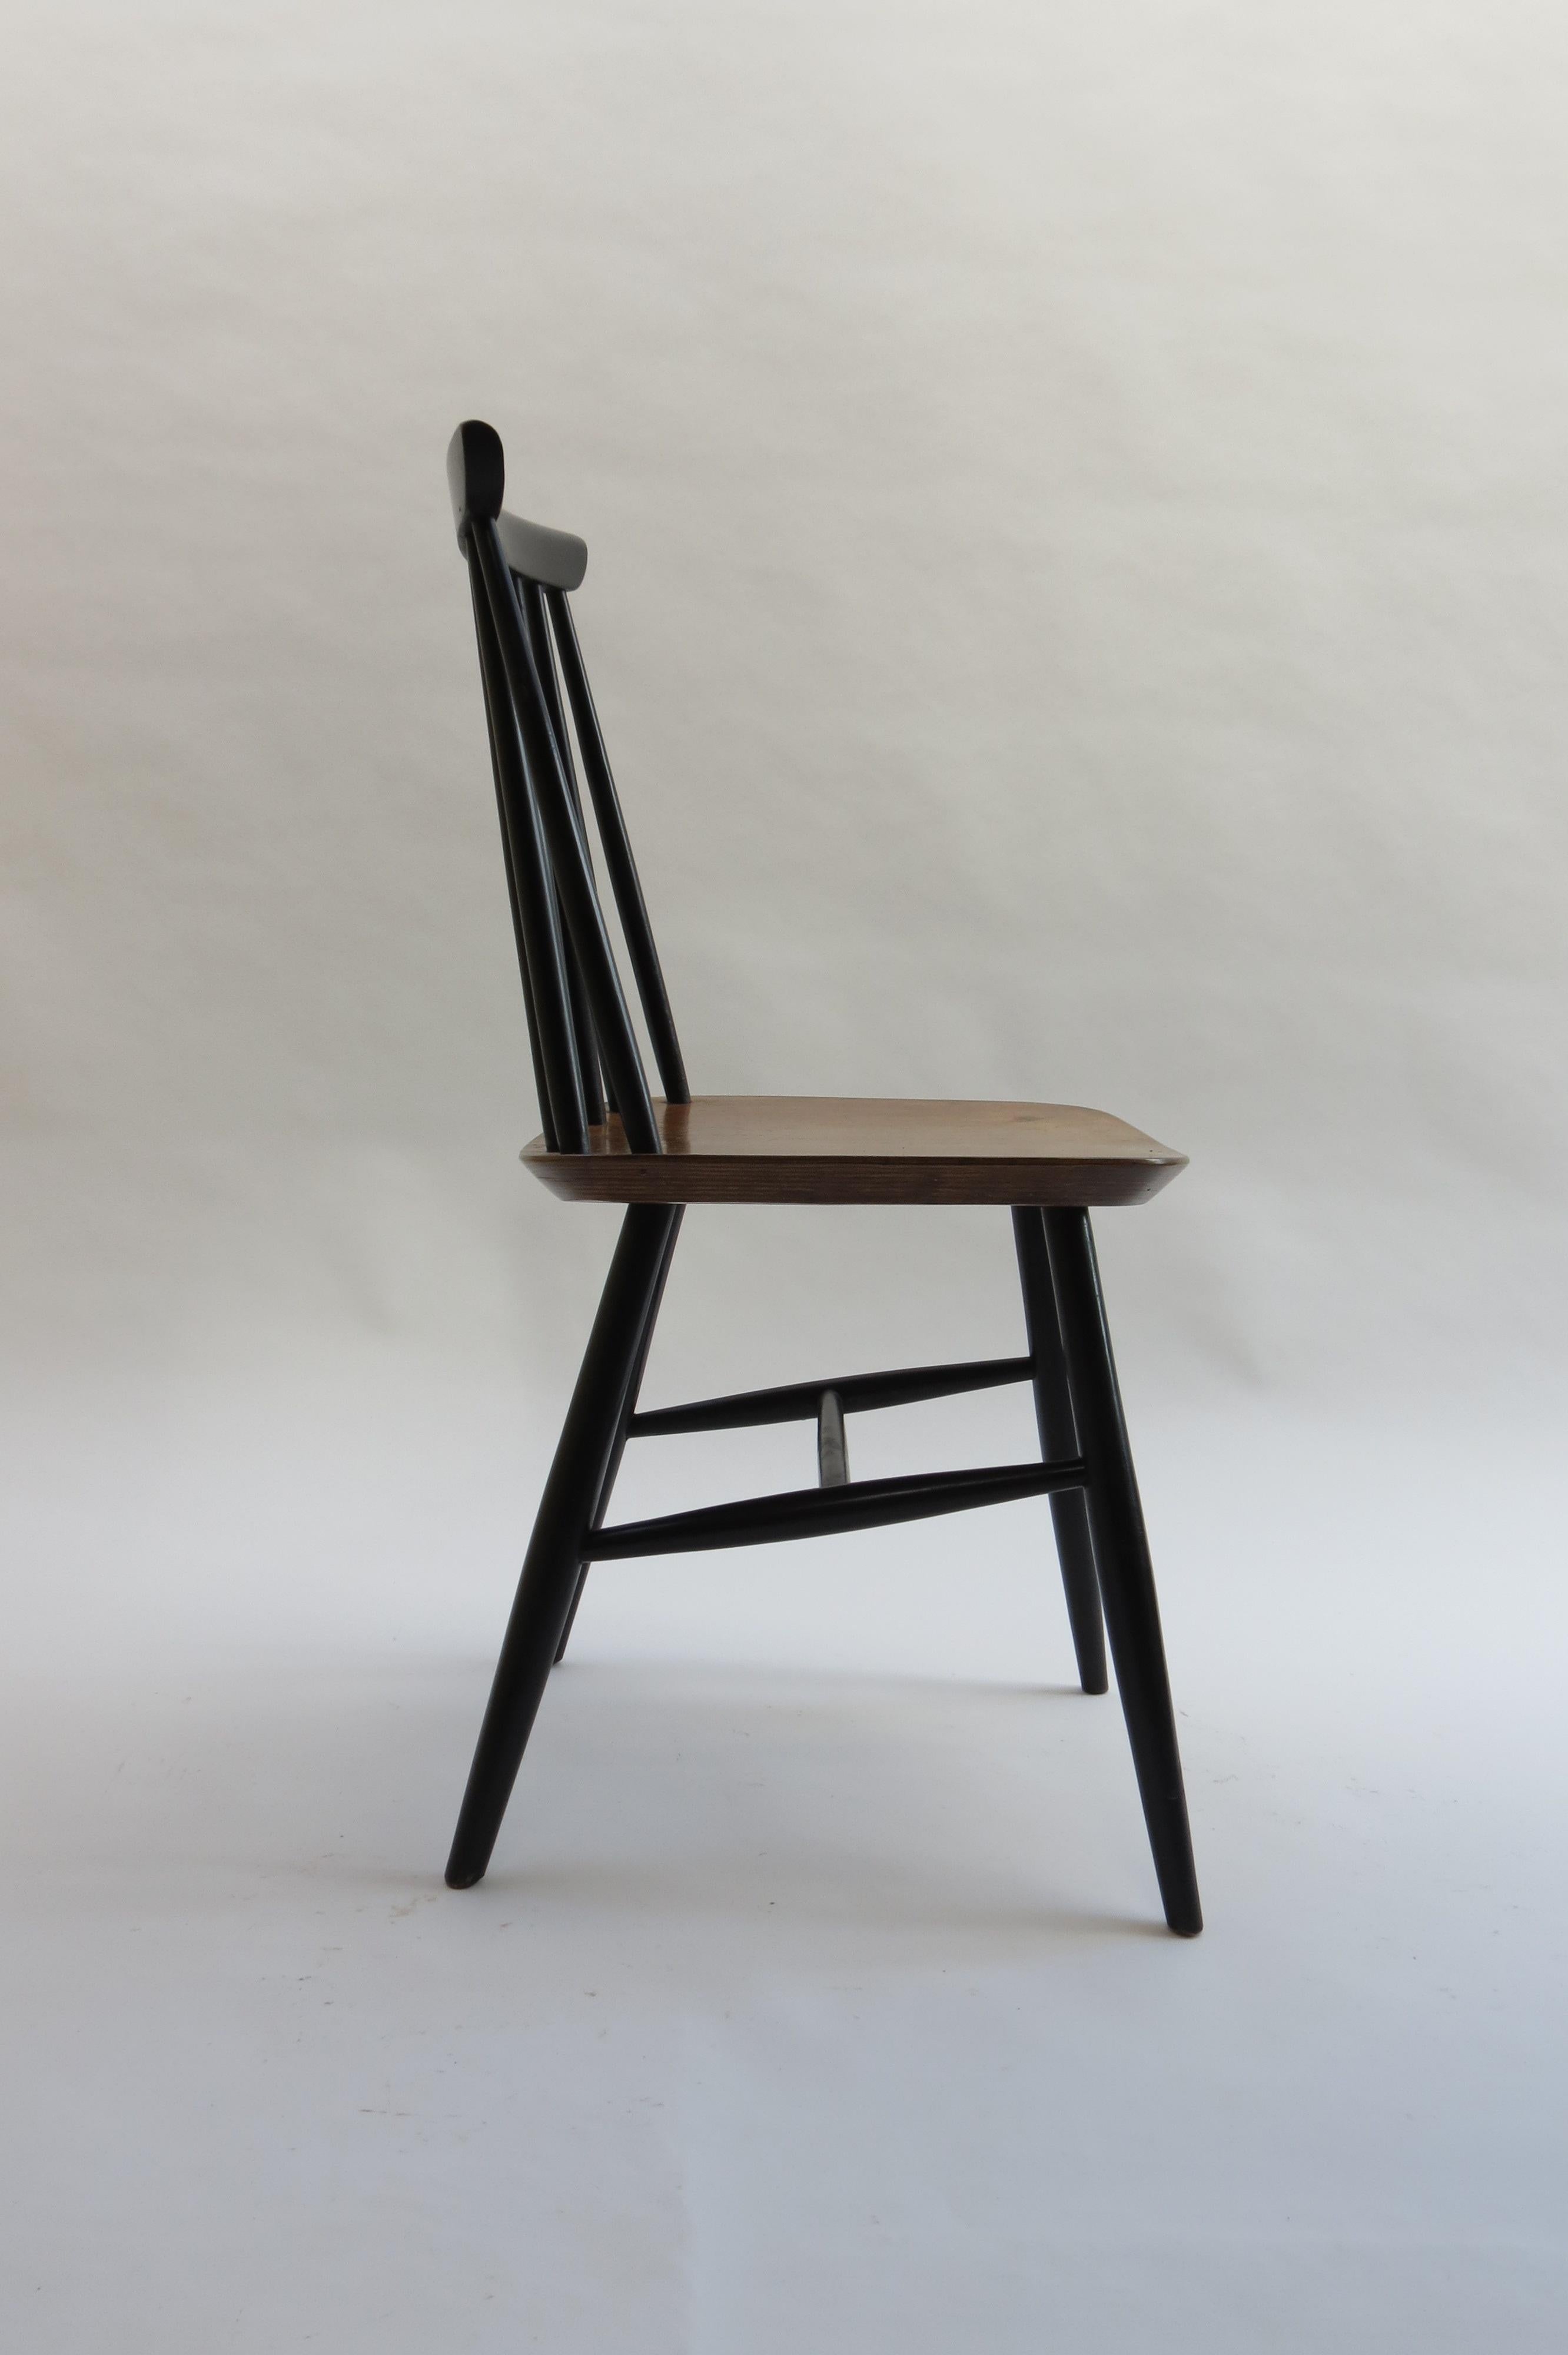 The 1950s Black and Walnut Dining Chair in the Style of Imari Tapiovaara (Moderne der Mitte des Jahrhunderts)